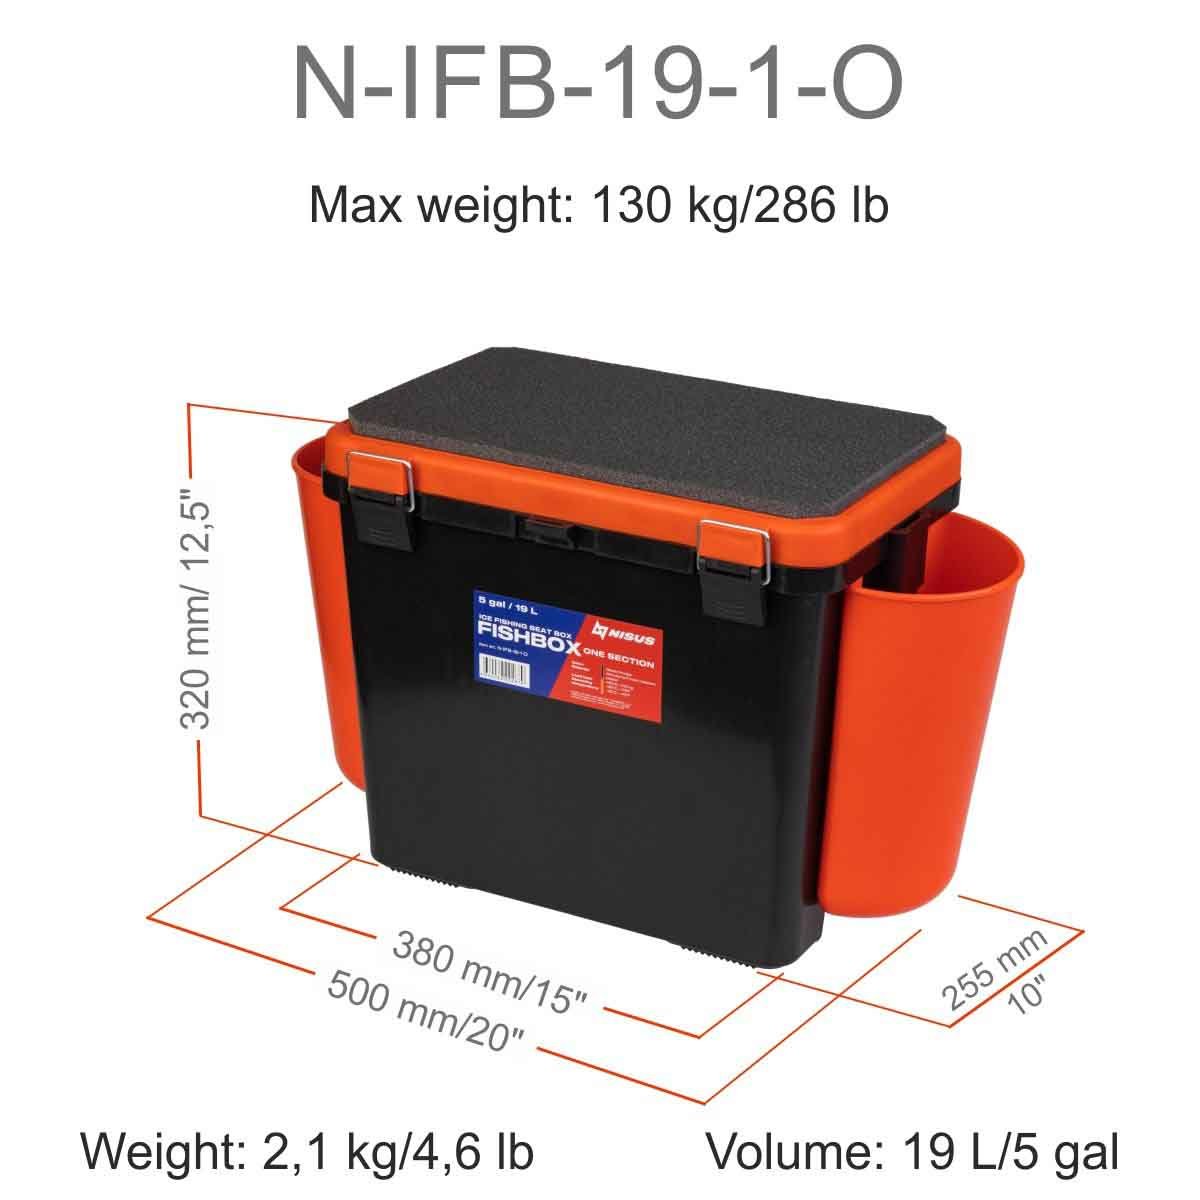 FishBox Large 5 gal Box for Ice Fishing with Seat could carry up to 286 pounds, it is 12.5 inches high, 20 inches long and 10 inches wide, weighing 4.6 lbs